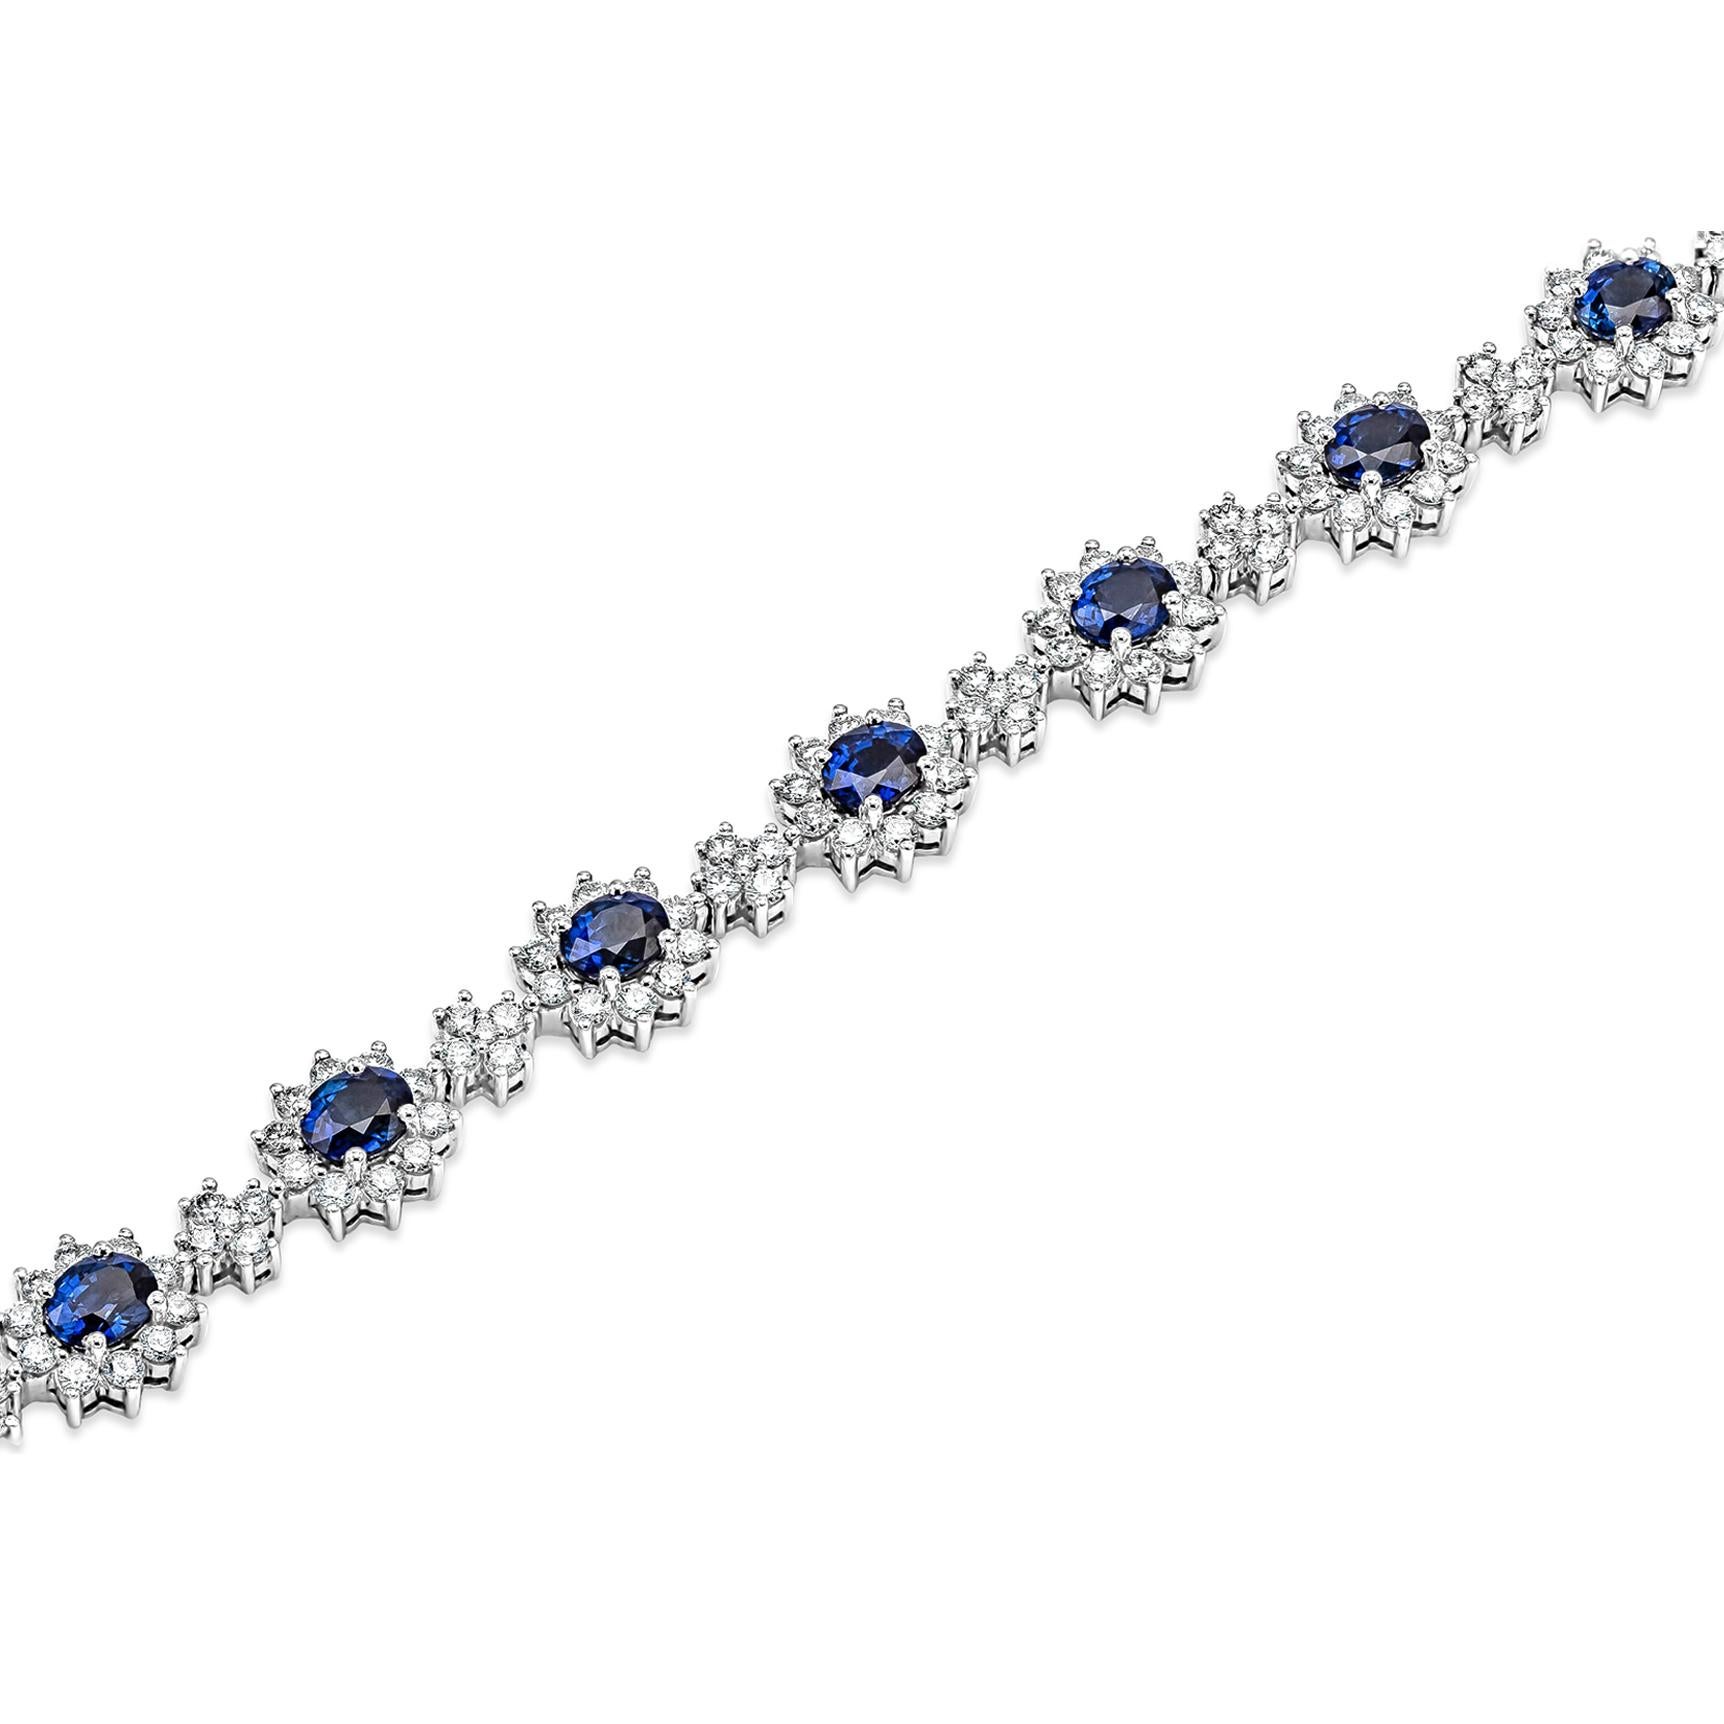 Add color to your style with this gorgeous sapphire flower bracelet. Features 12 oval cut blue sapphires surrounded by a single row of sparkling round diamonds in a floral motif setting. Each sapphire flower is spaced by a smaller flower set with